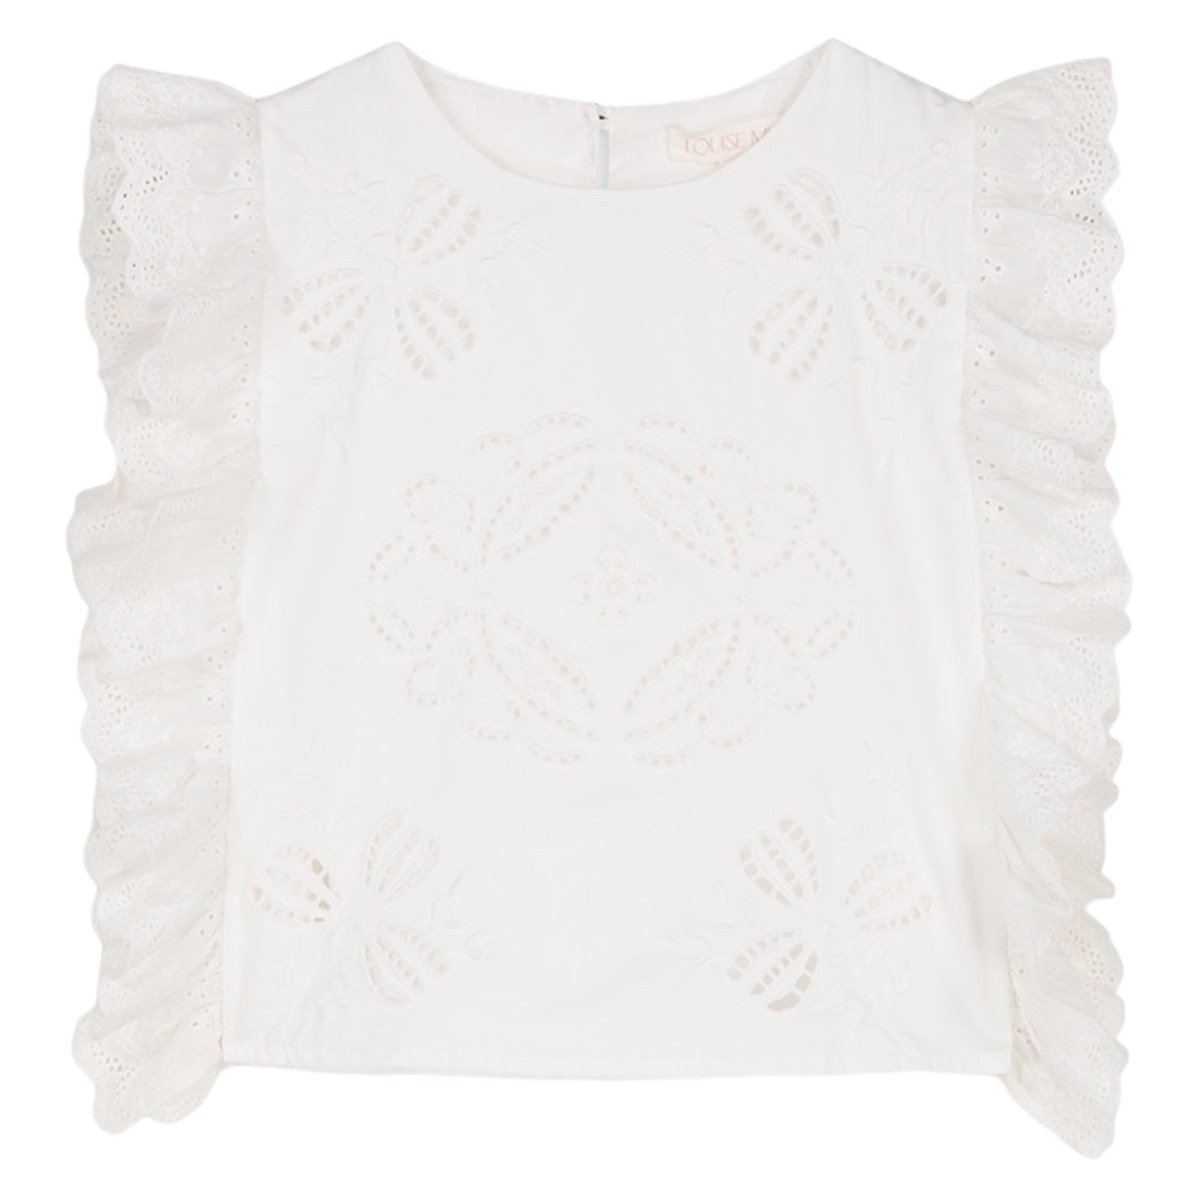 MALA EMBROIDERED TOP (PREORDER) - LOUISE MISHA KIDS